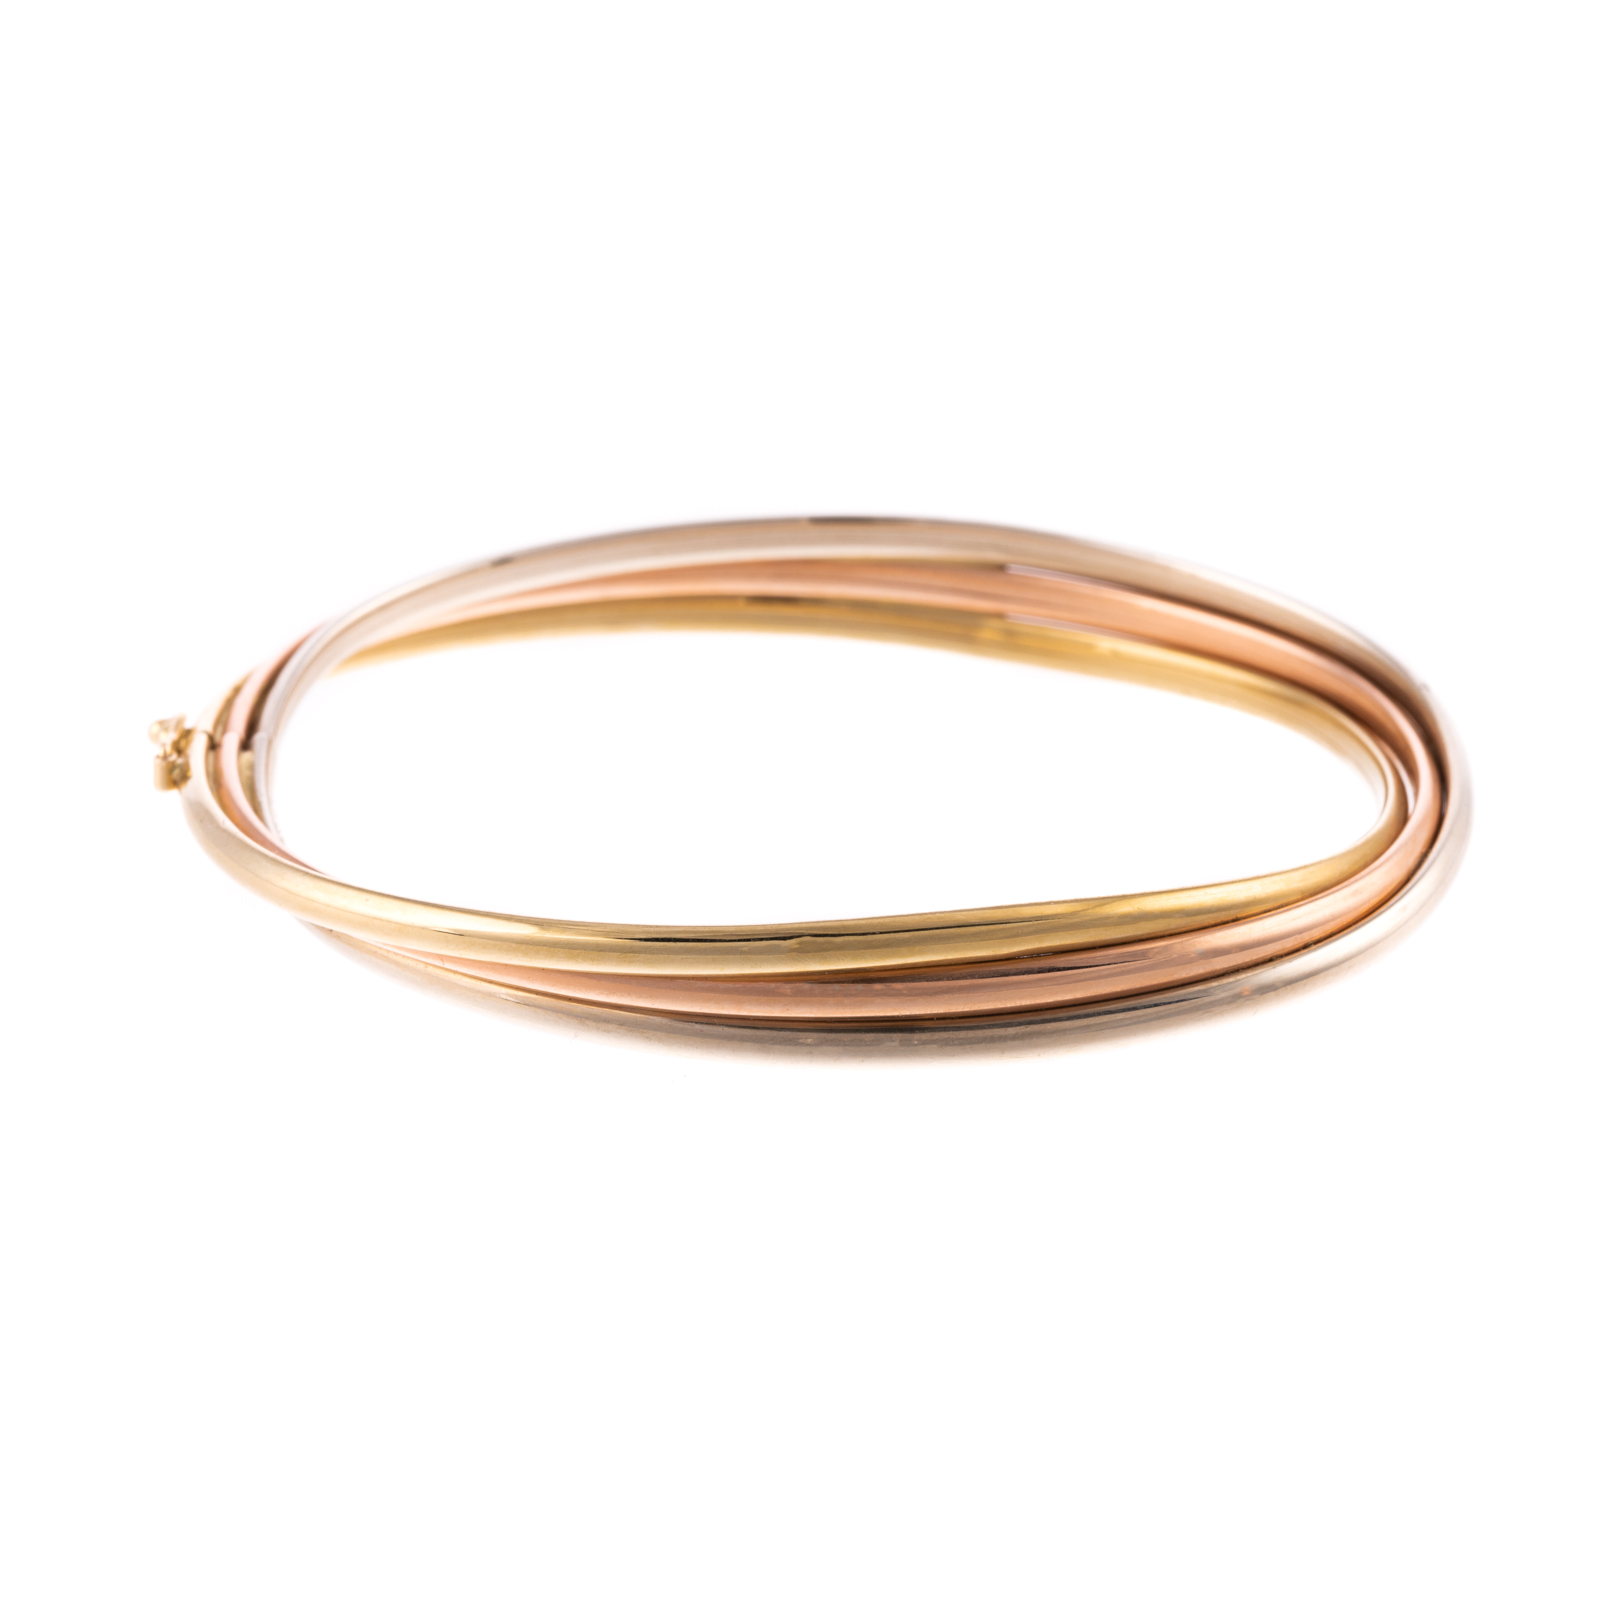 A TRI-COLOR BANGLE IN 14K 14K yellow,